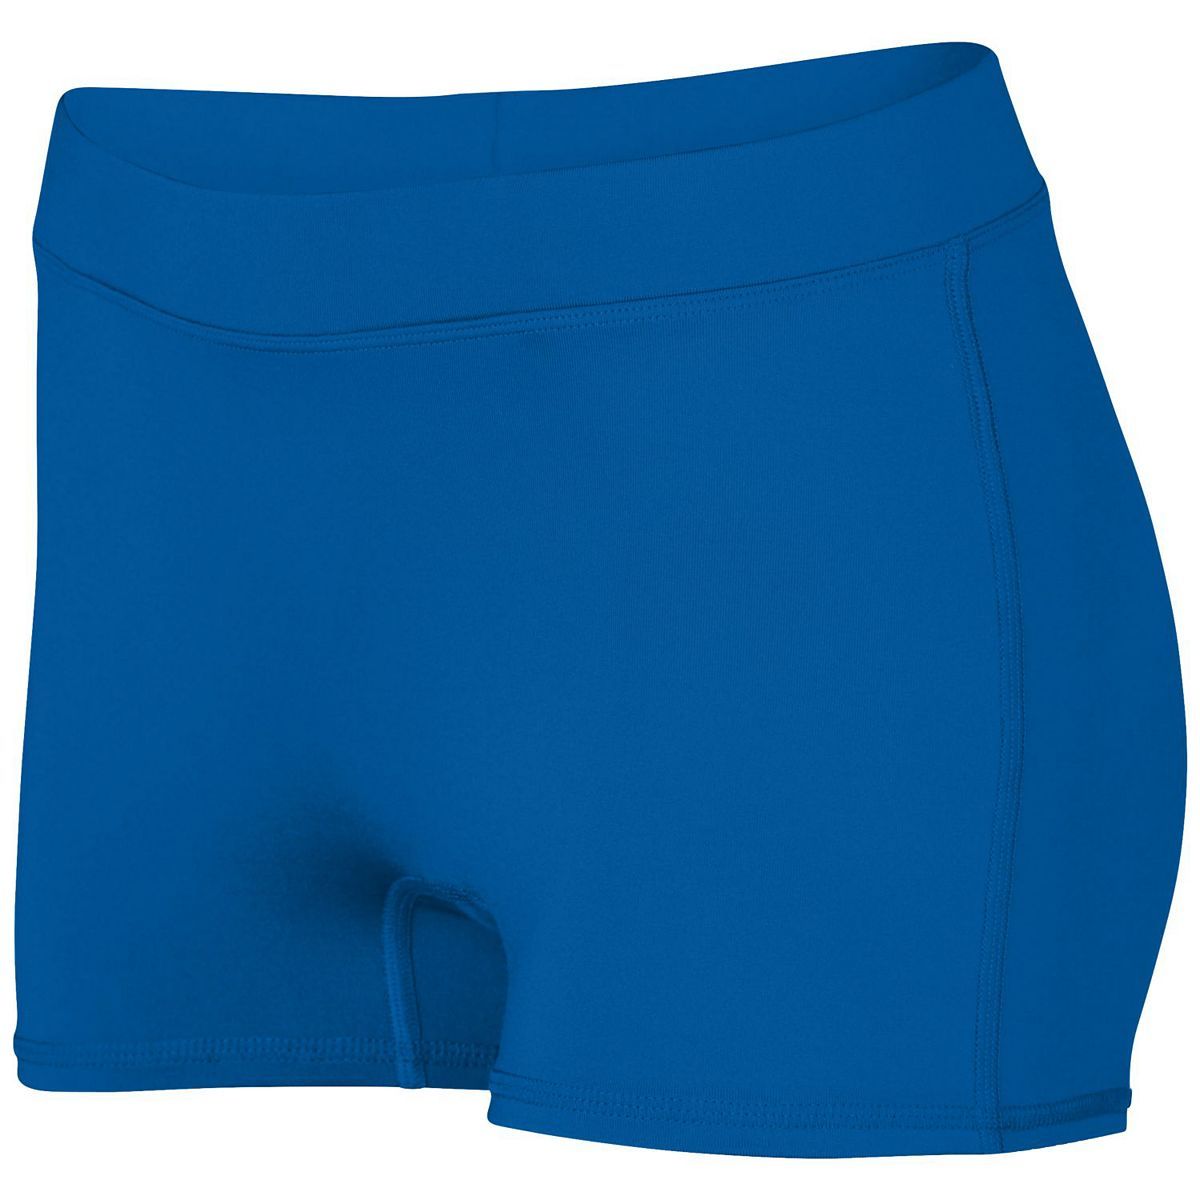 Augusta Sportswear Girls Dare Shorts in Royal  -Part of the Girls, Augusta-Products, Volleyball, Girls-Shorts product lines at KanaleyCreations.com